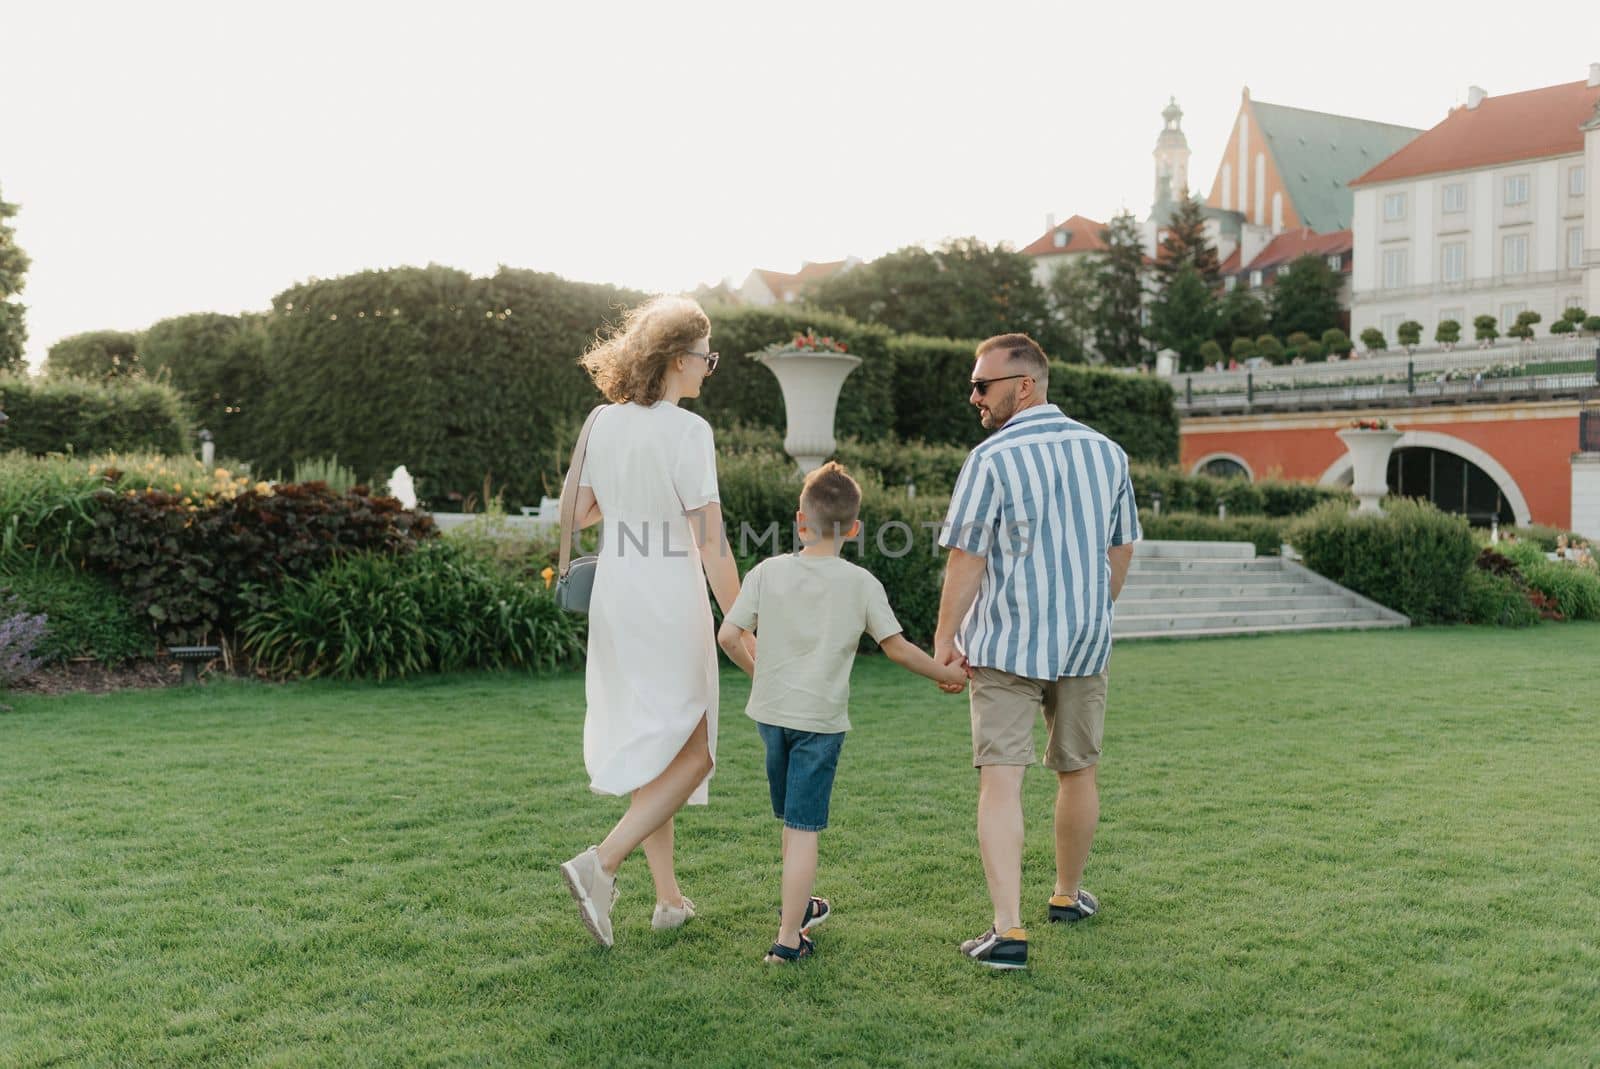 A photo from the back of a family is running in the garden of the palace in an old European town. A happy father, mother, and son are holding hands and having fun at sunset.